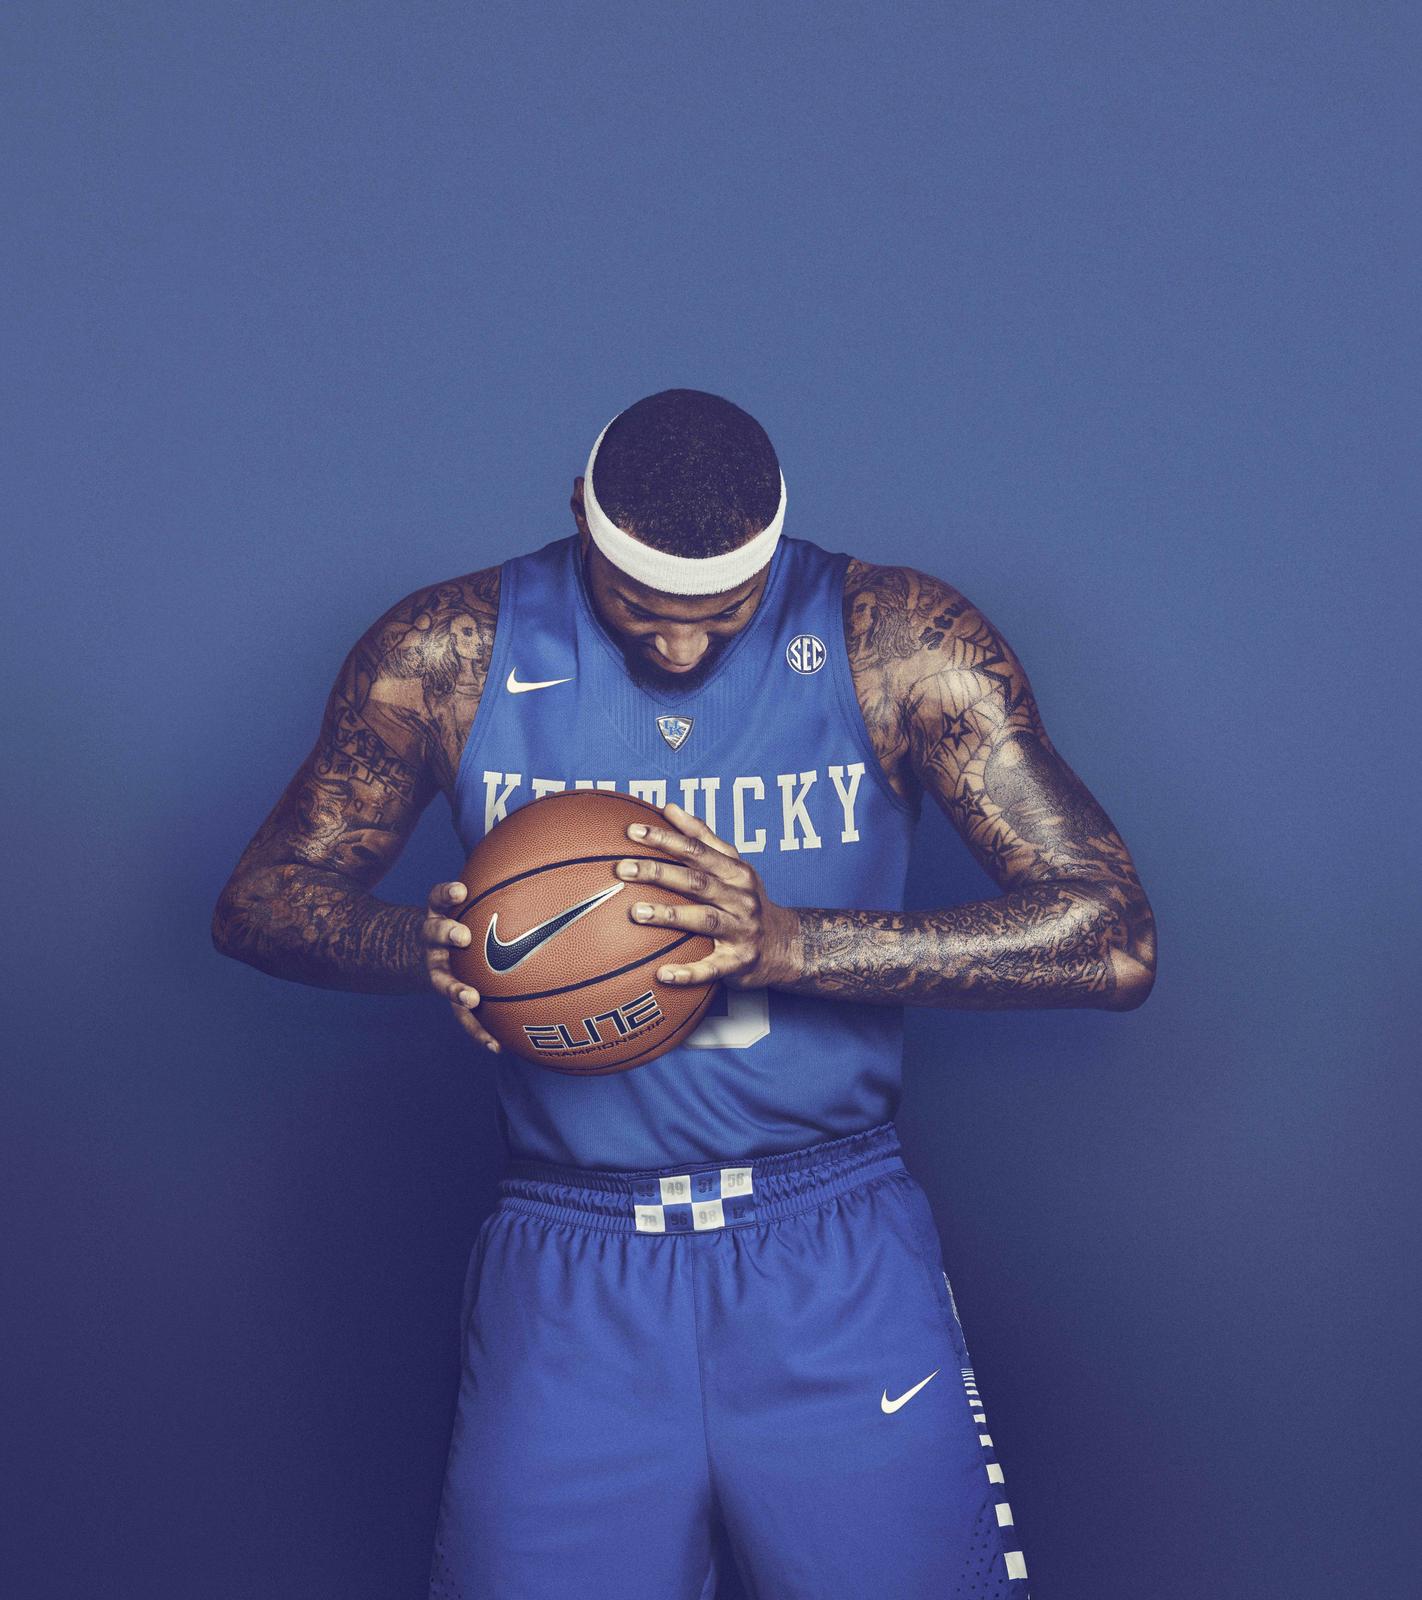 NBA Stars x March Madness In Nike College Uniforms